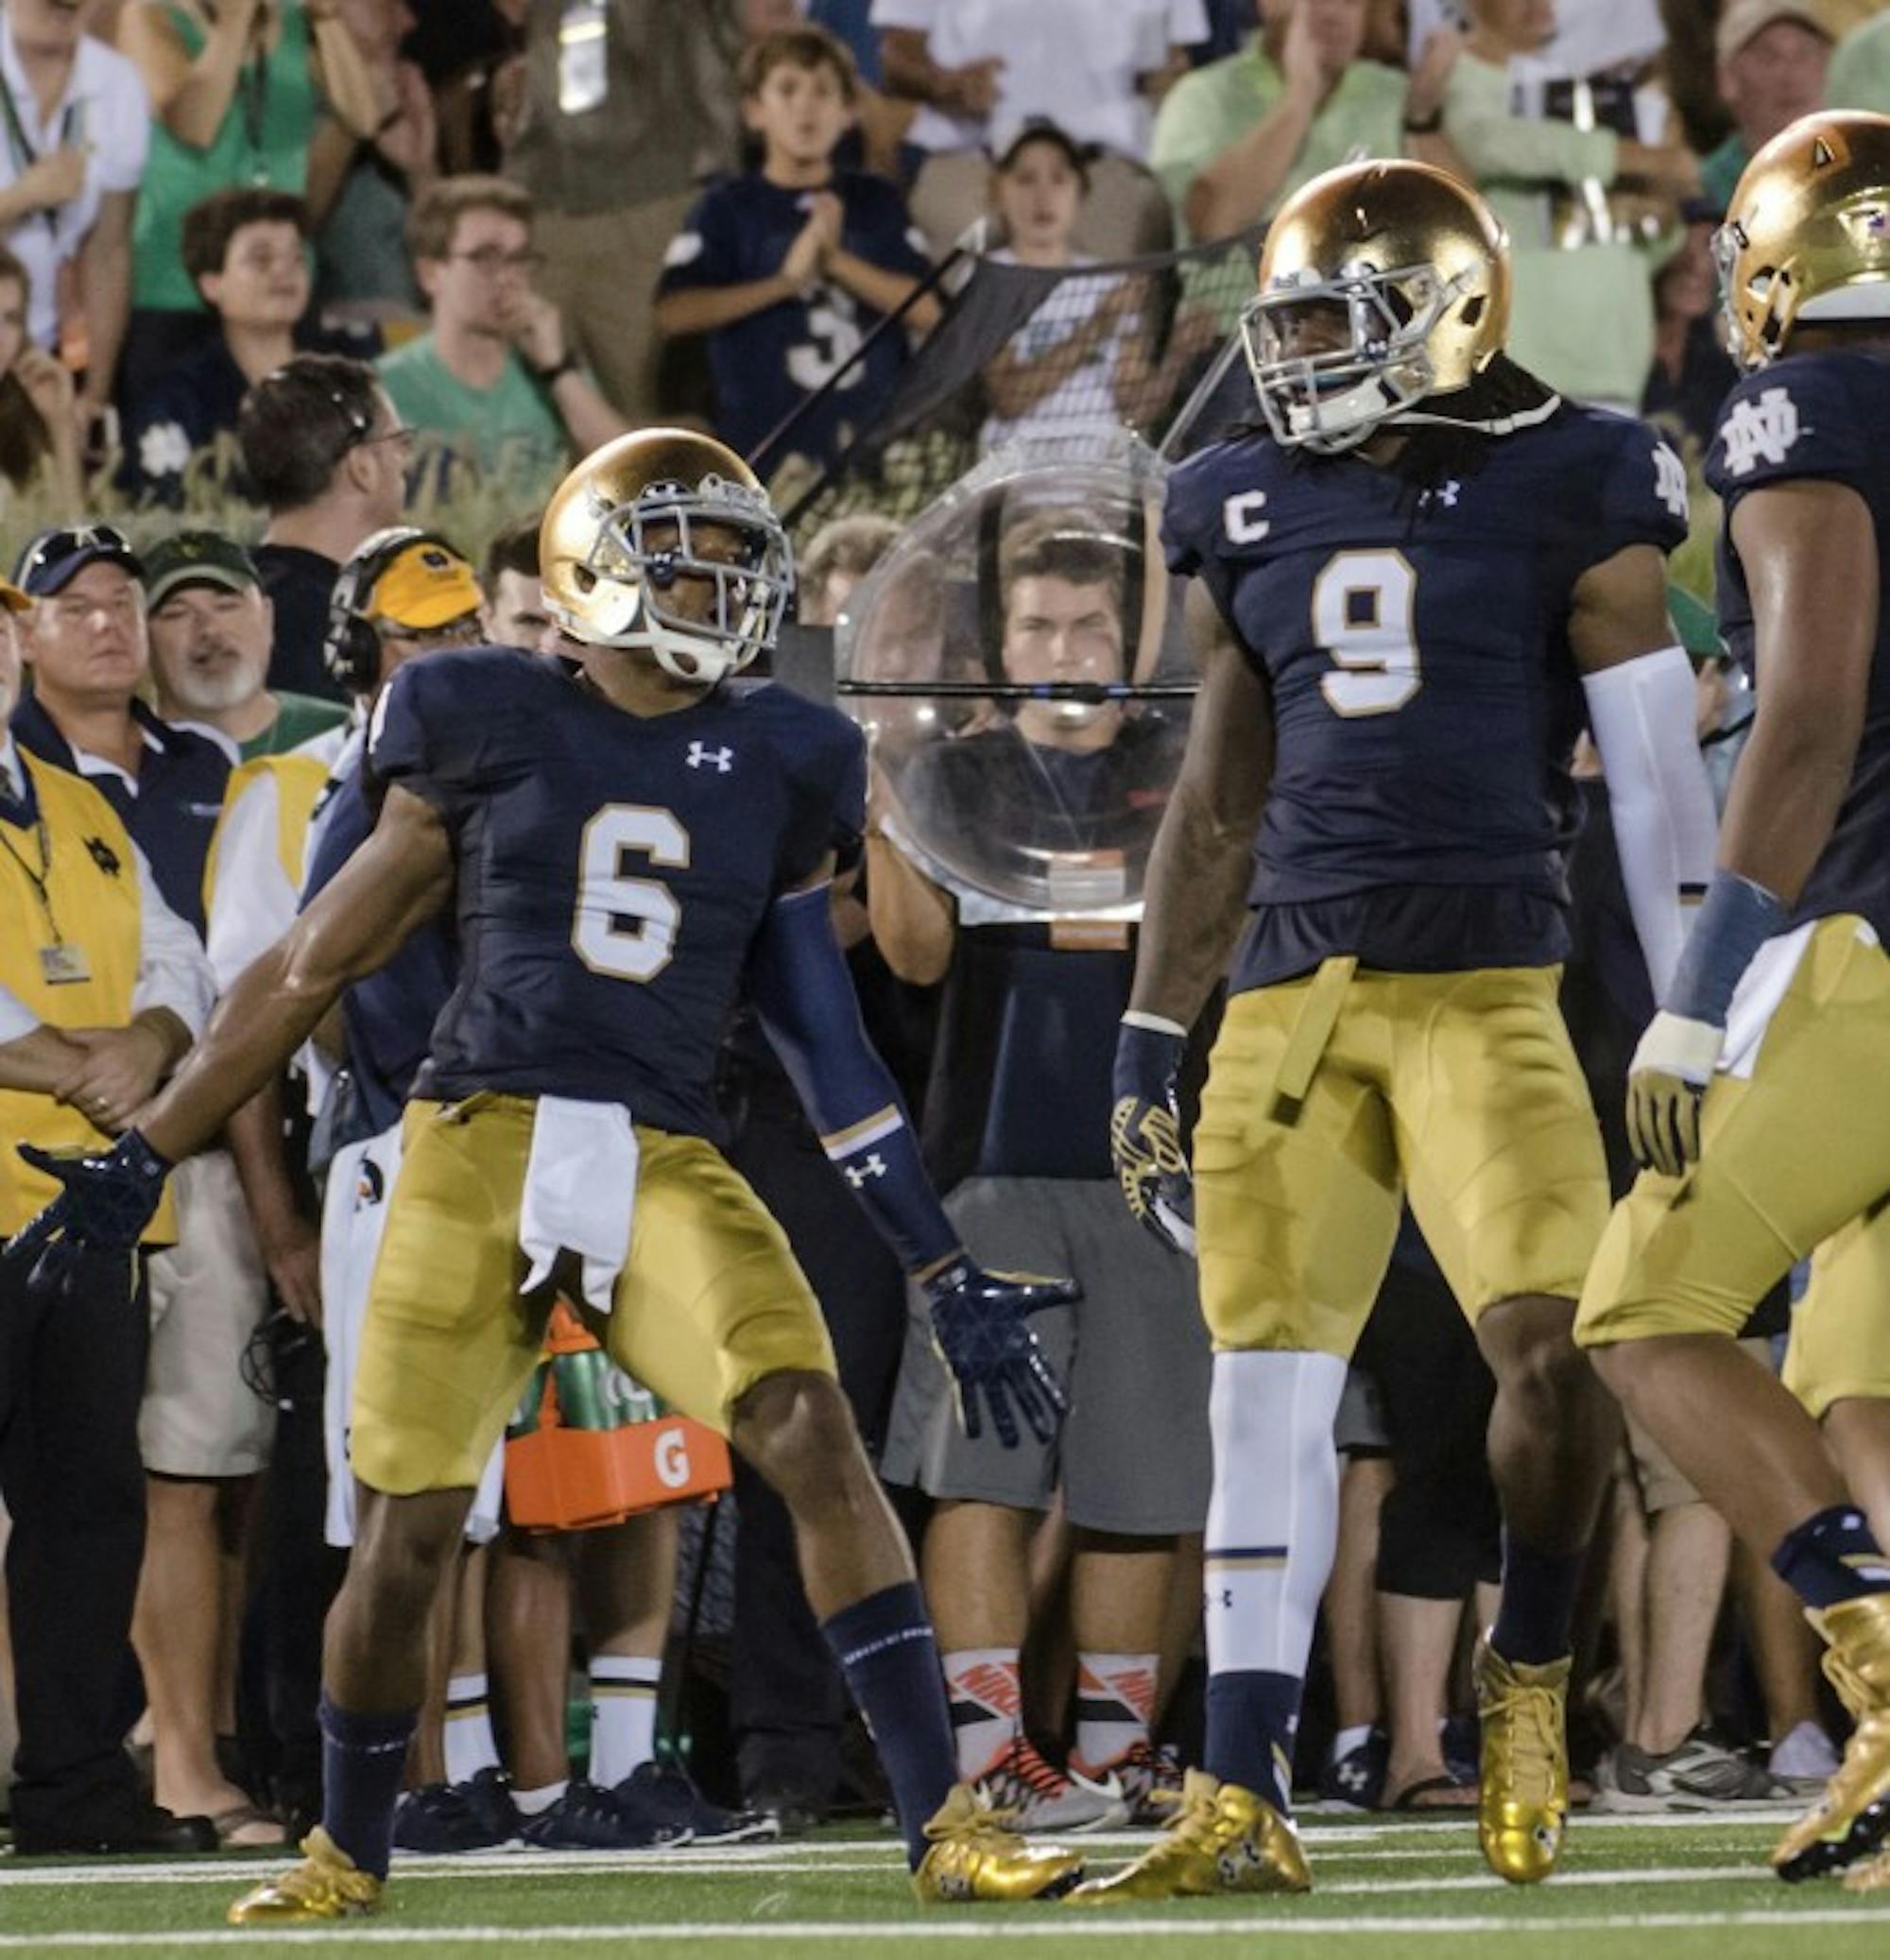 Former Irish cornerback KeiVarae Russell celebrates a third-down stop during Notre Dame's 38-3 win over Texas on Sept. 5 at Notre Dame Stadium. Russell was the fifth Irish player to be drafted in the 2016 NFL Draft.